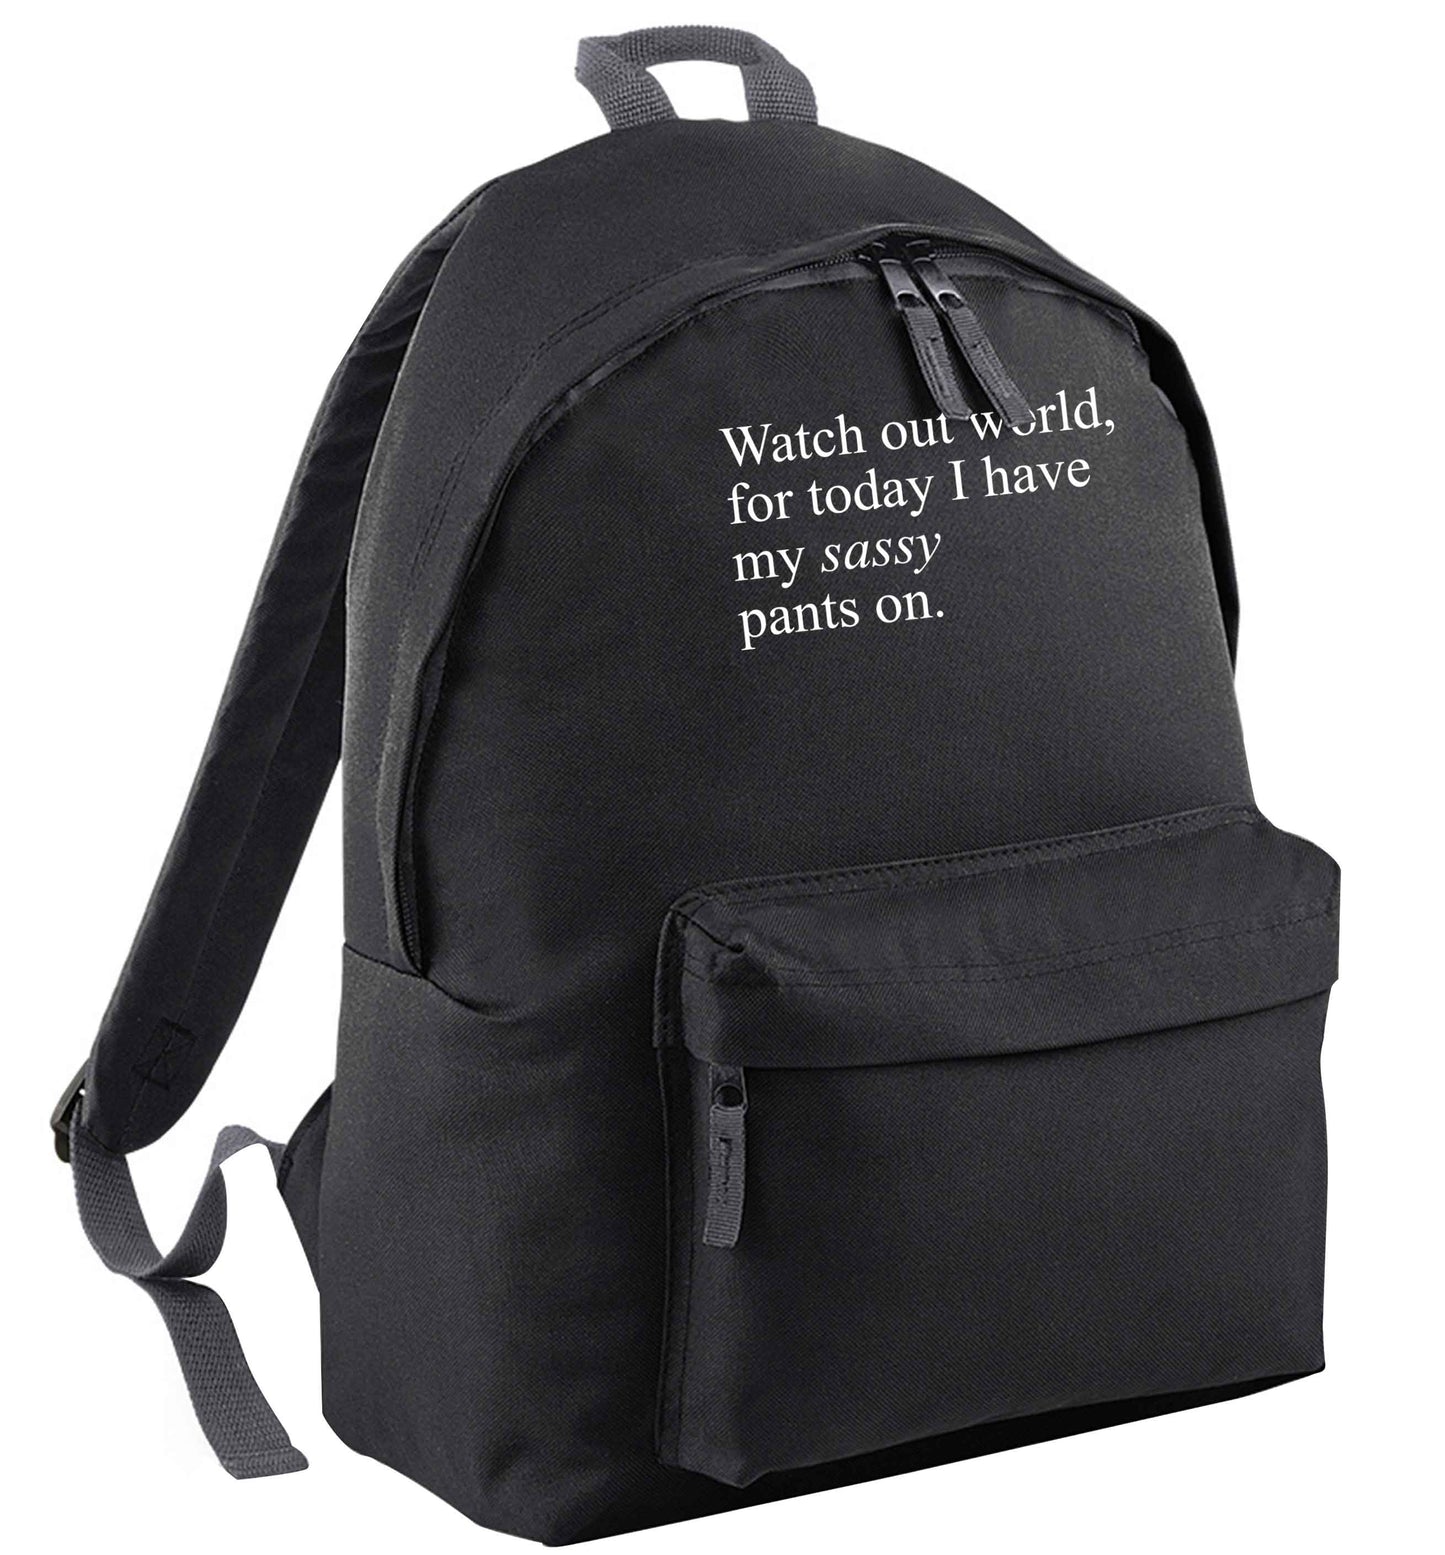 Watch out world for today I have my sassy pants on | Children's backpack